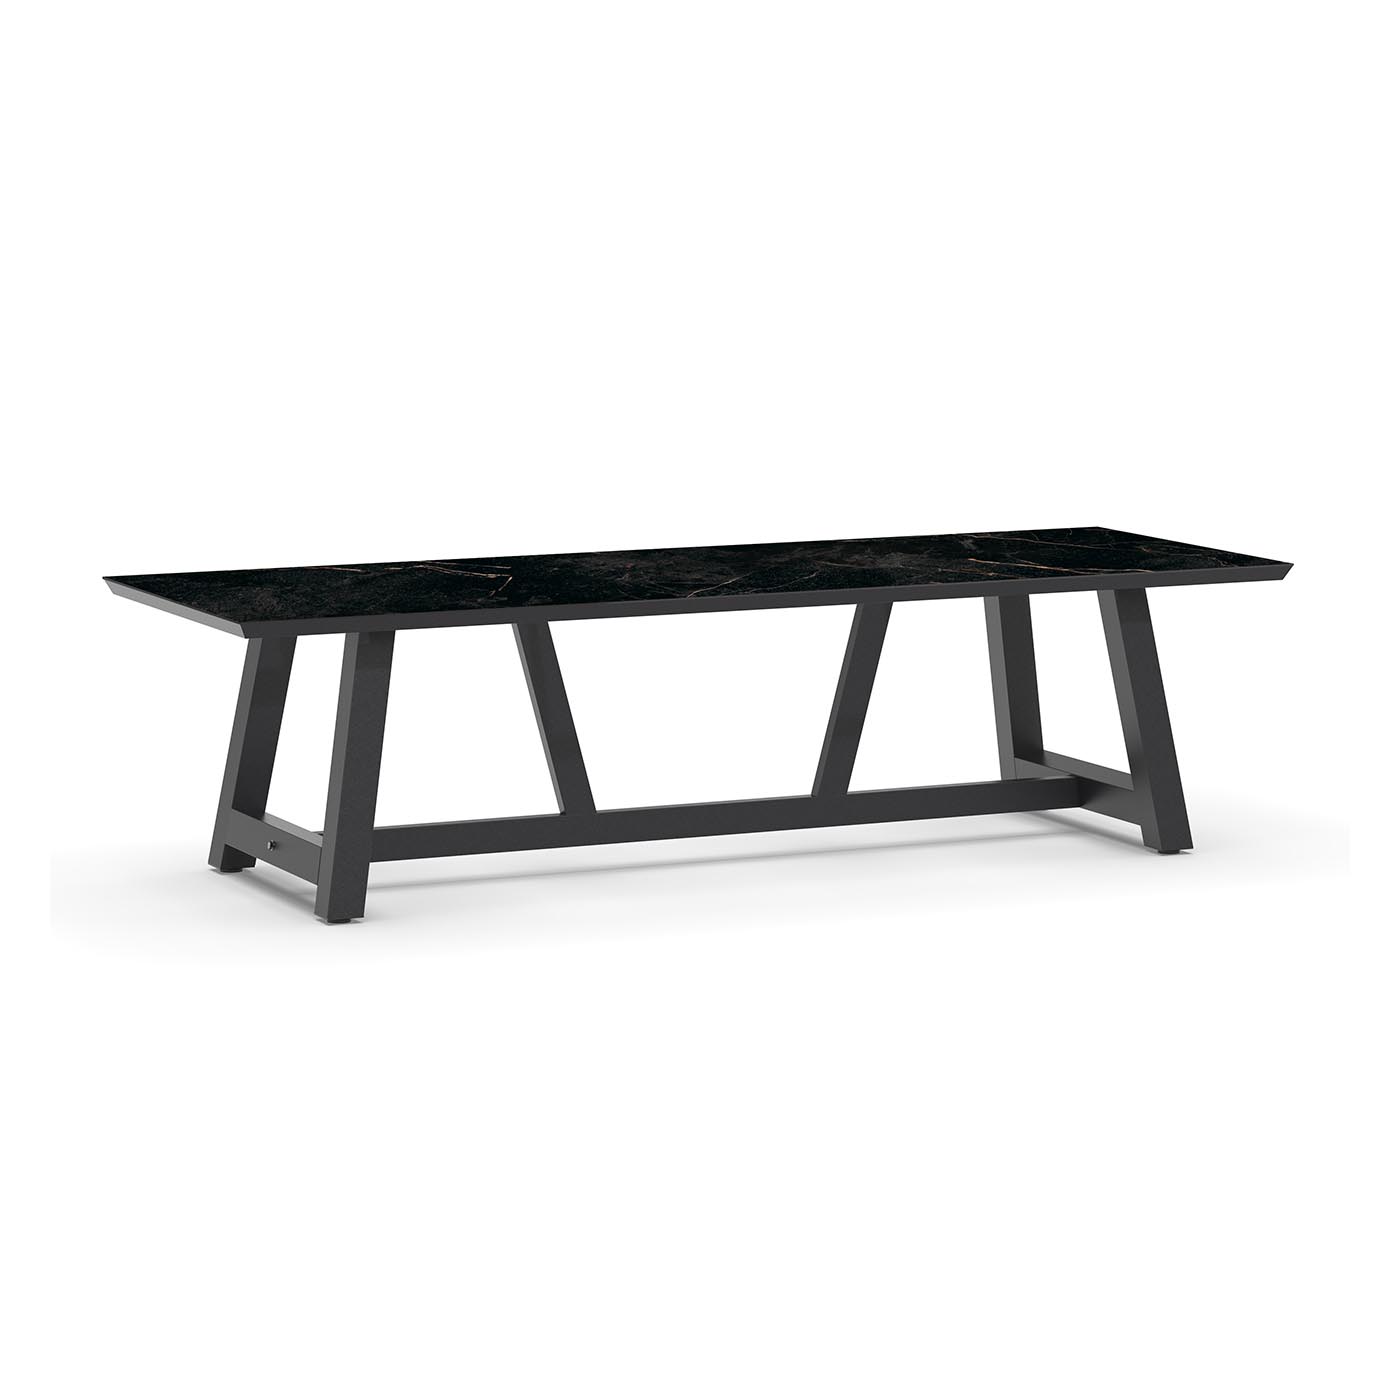 Ozon Dining Table Trespa Marble 280 x 100 cm Charcoal